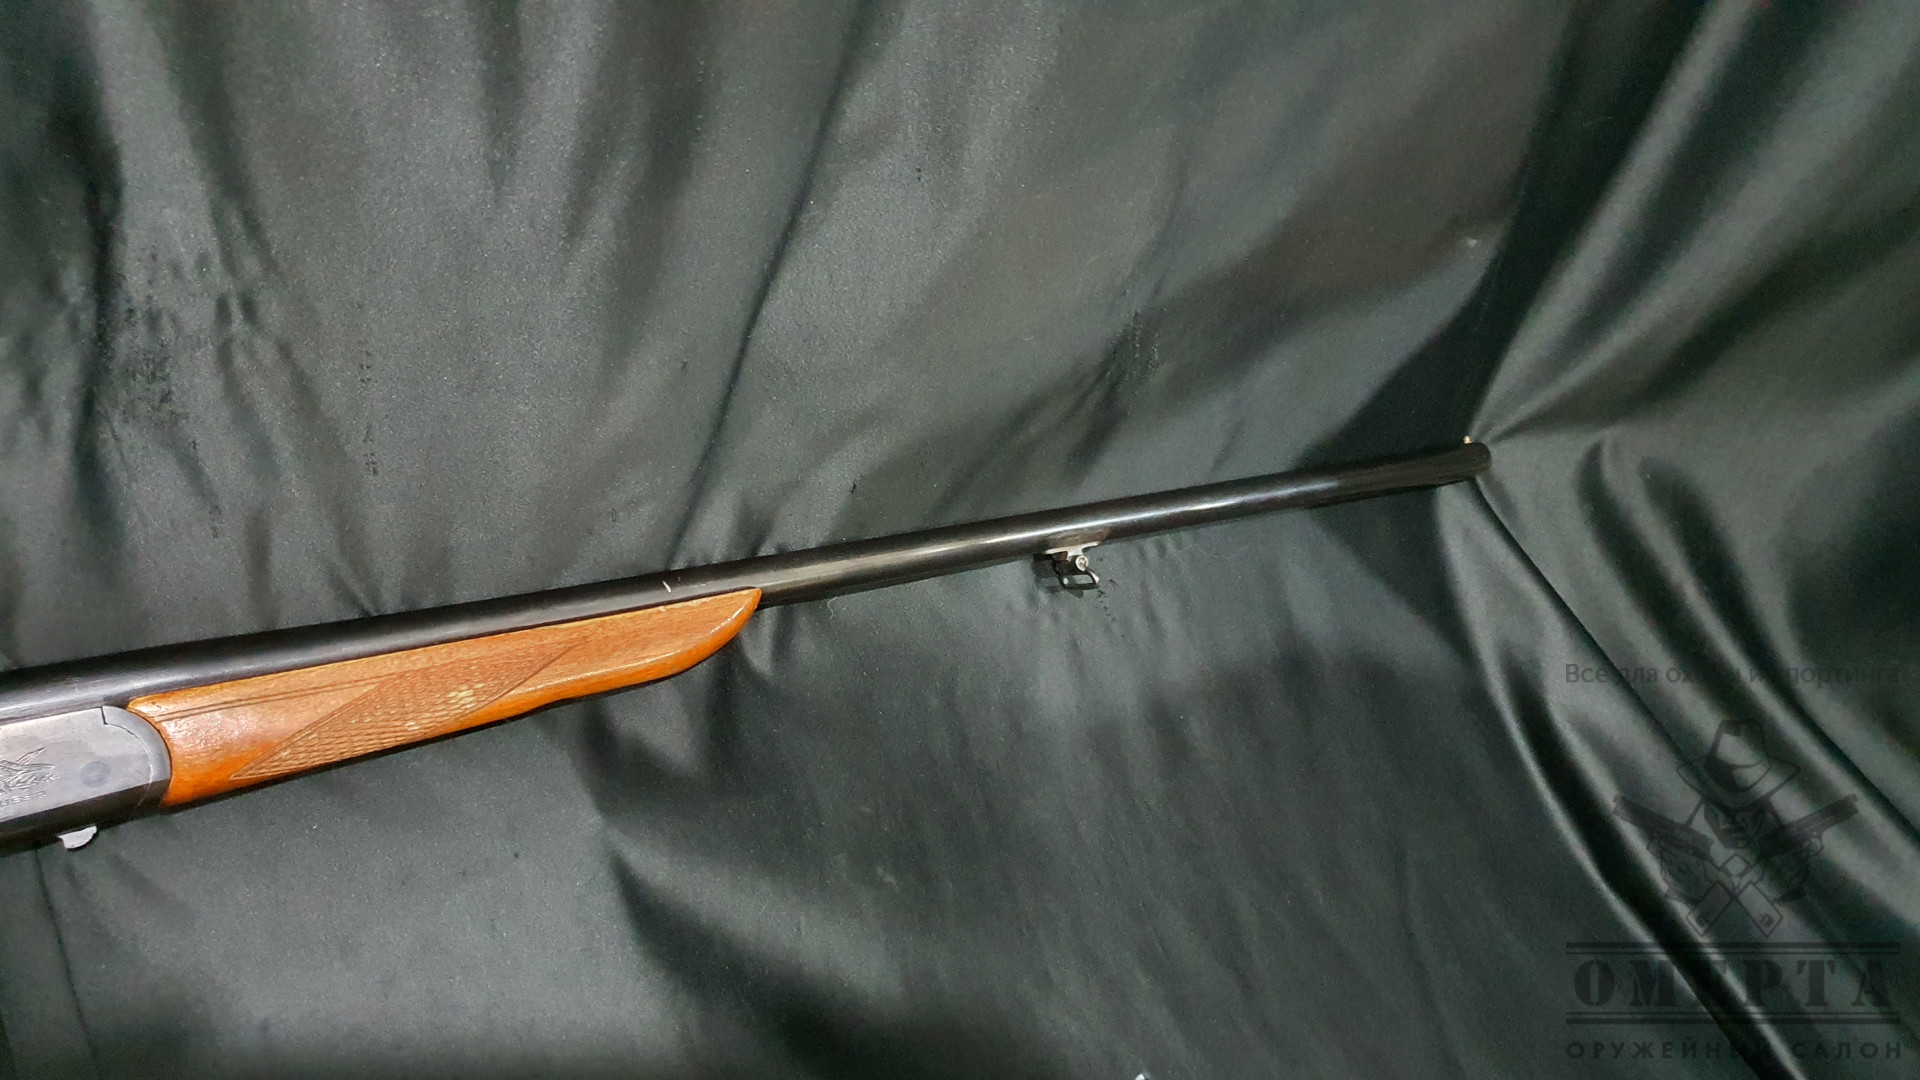 ИЖ-18Е, кал.32/70 "Made in USSR"